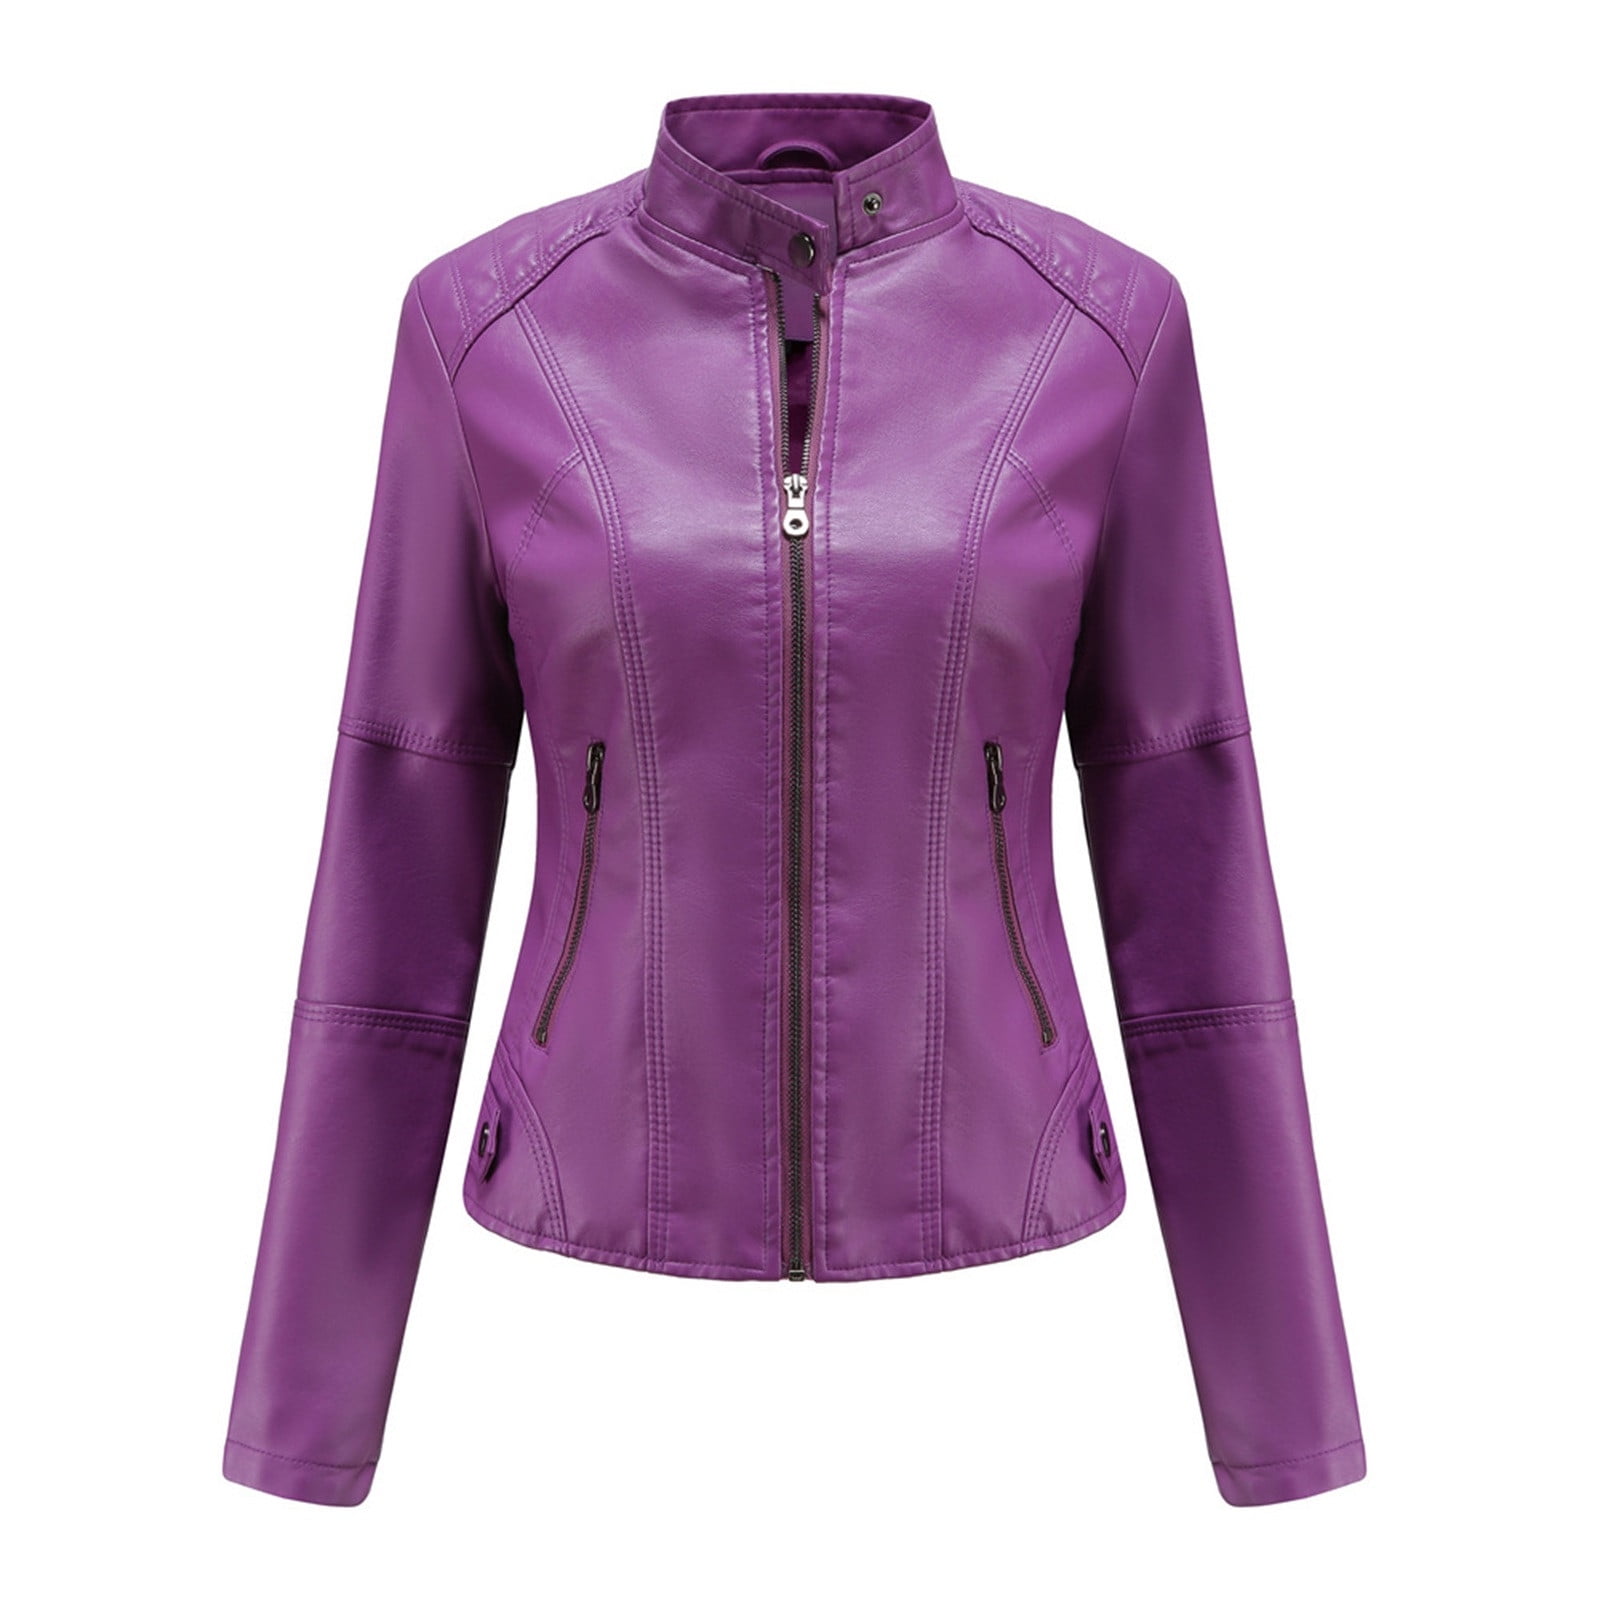 Holiday Deals Saving! Pejock Women's Faux Leather Jackets Zip Up ...